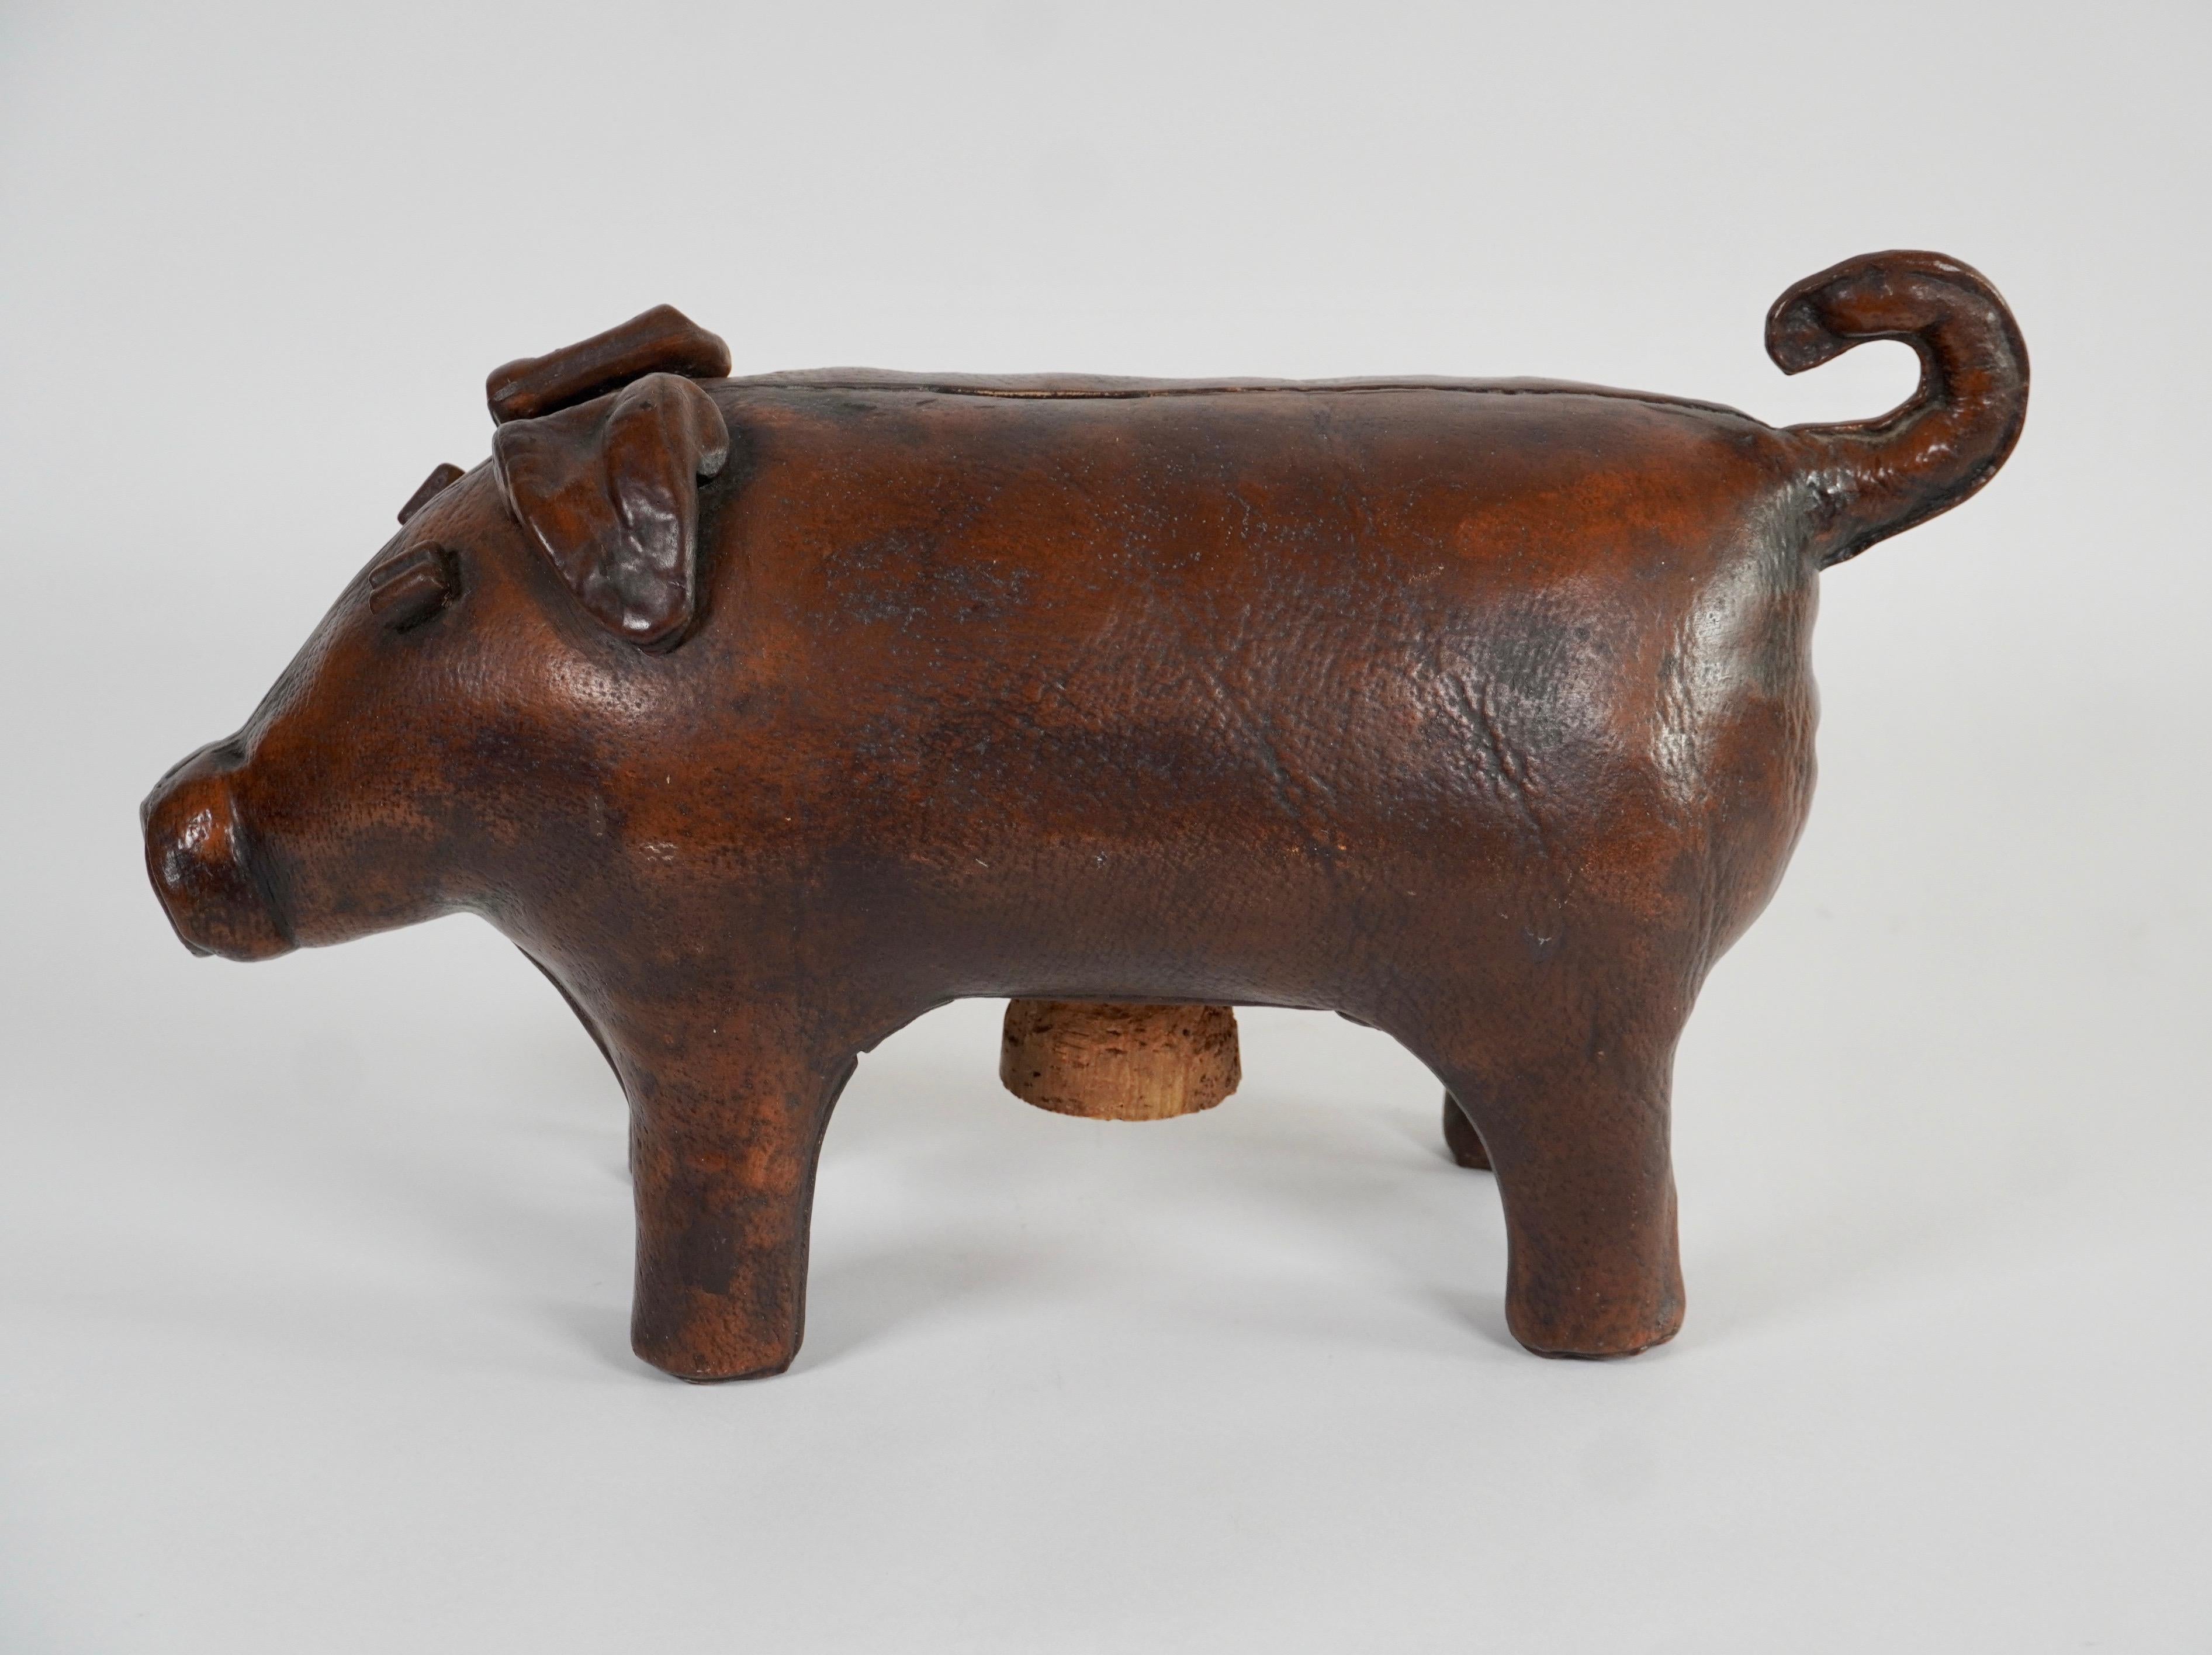 Hand-Crafted Realistic Ceramic Piggy Bank in the Style of an Omersa Leather Pig